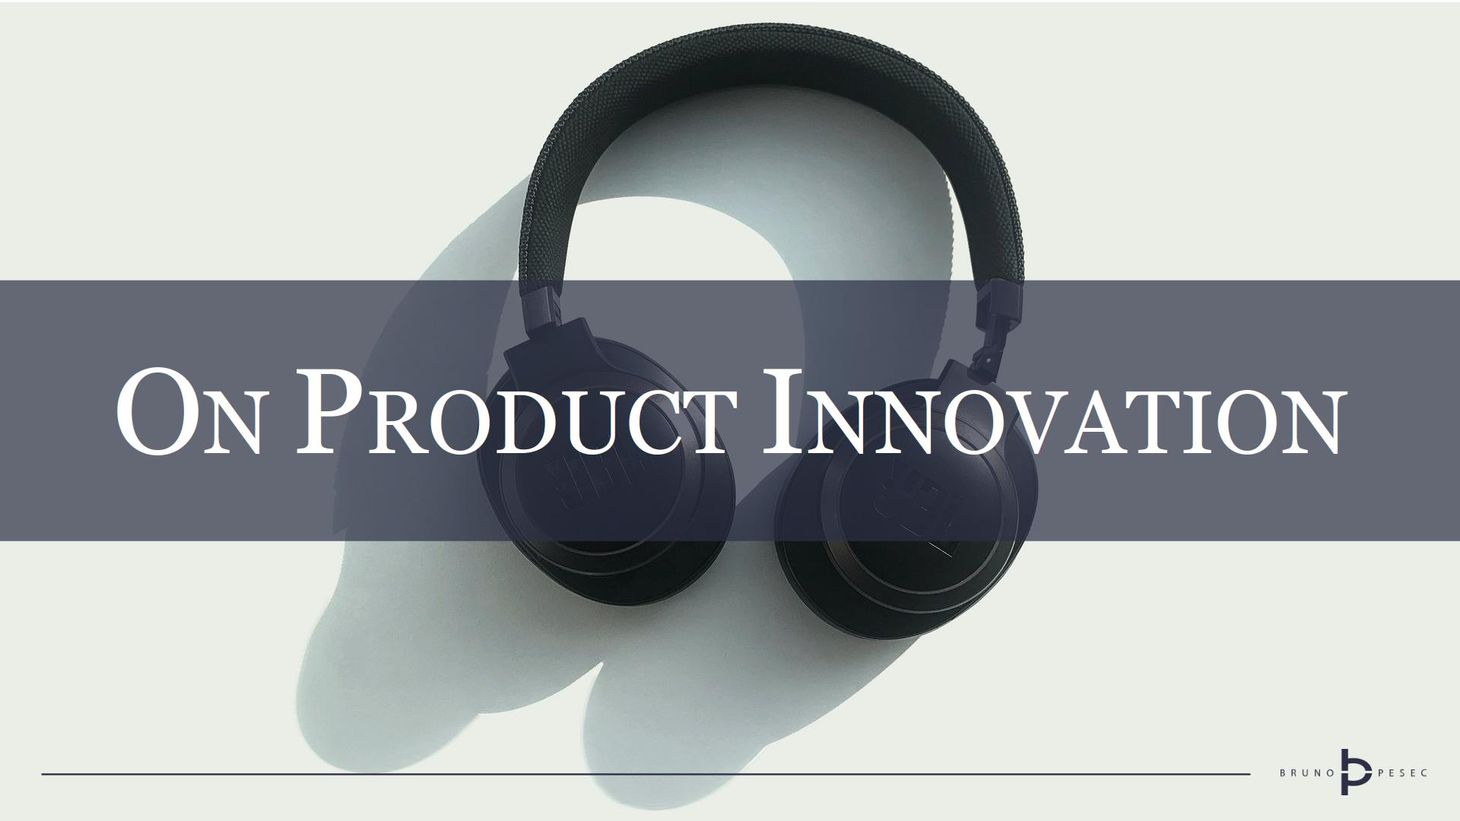 On product innovation